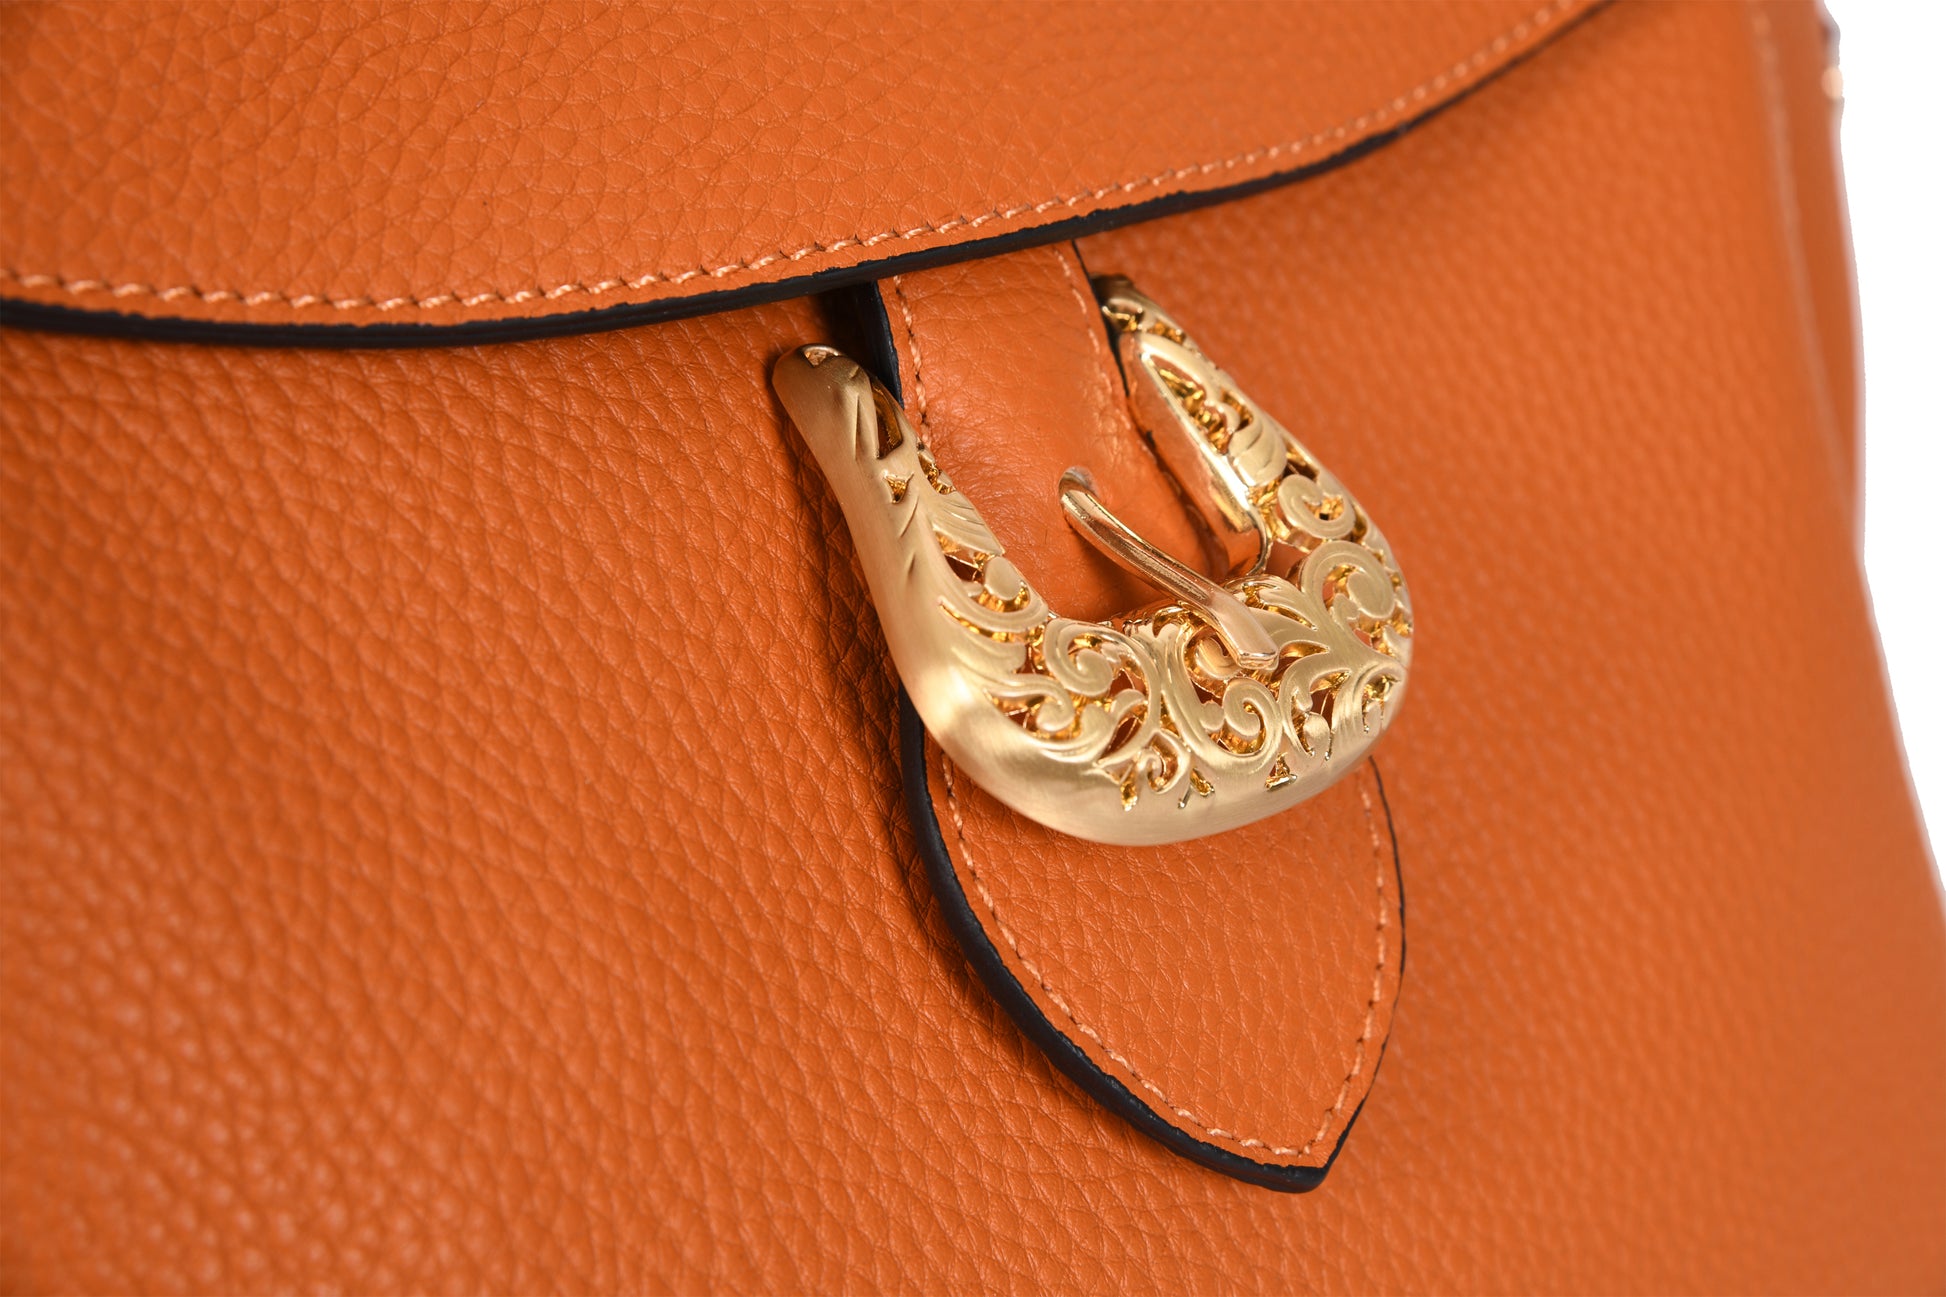 Bali Pebble Grain Leather Orange Sunset Handbag made by Dewi Maya gold buckle available at the best boutique in Upstate South Carolina Spartanburg Greenville Dewi Maya Boutique